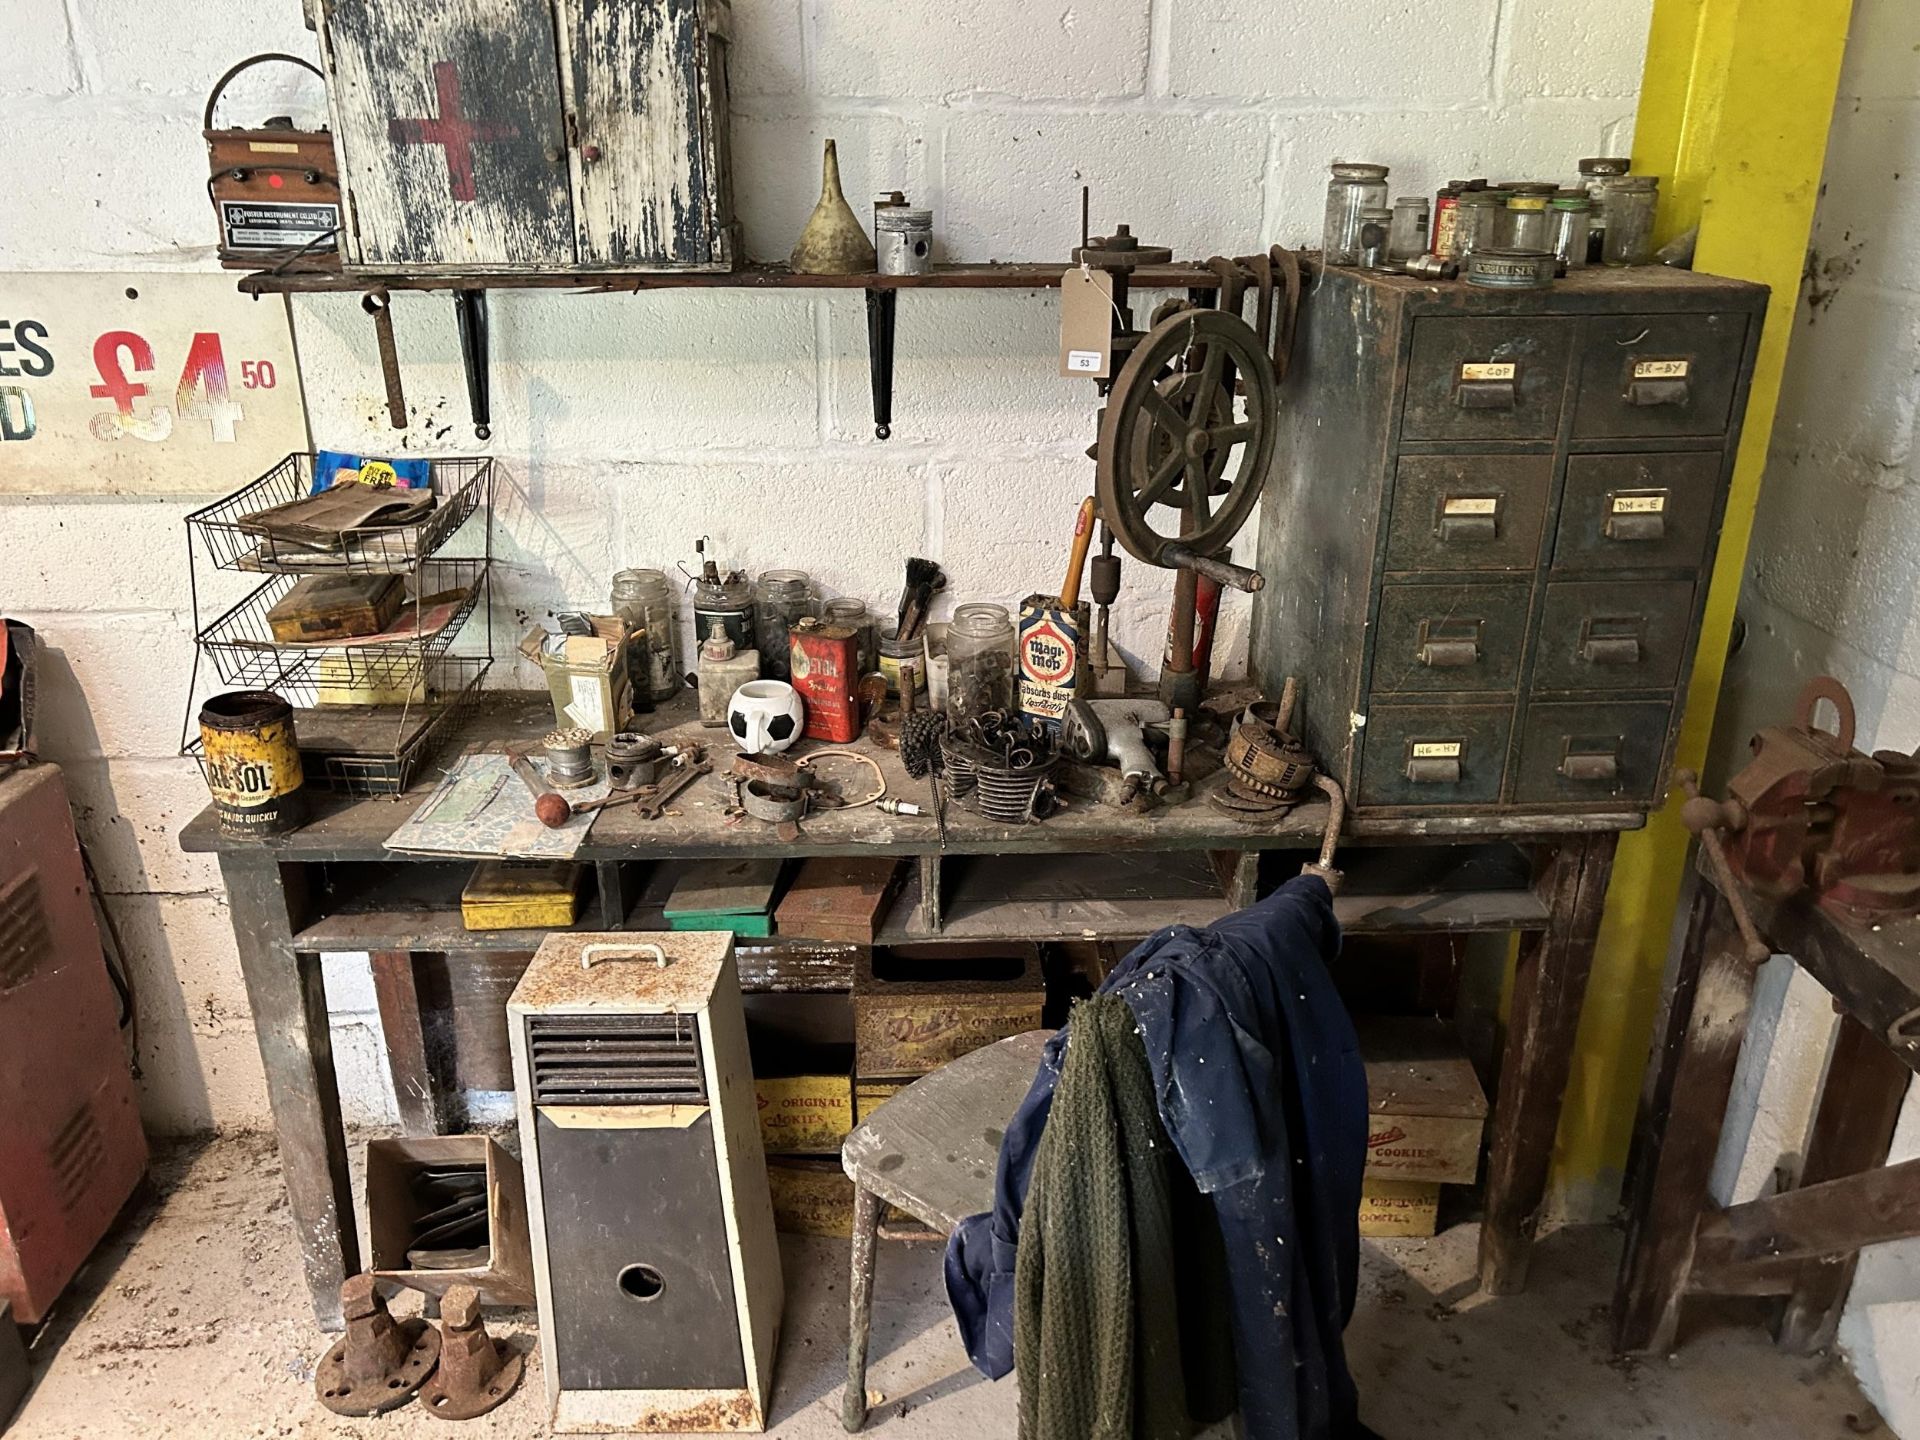 The workshop and other items, removed from John Pearson's garage, including tools, a work bench, and